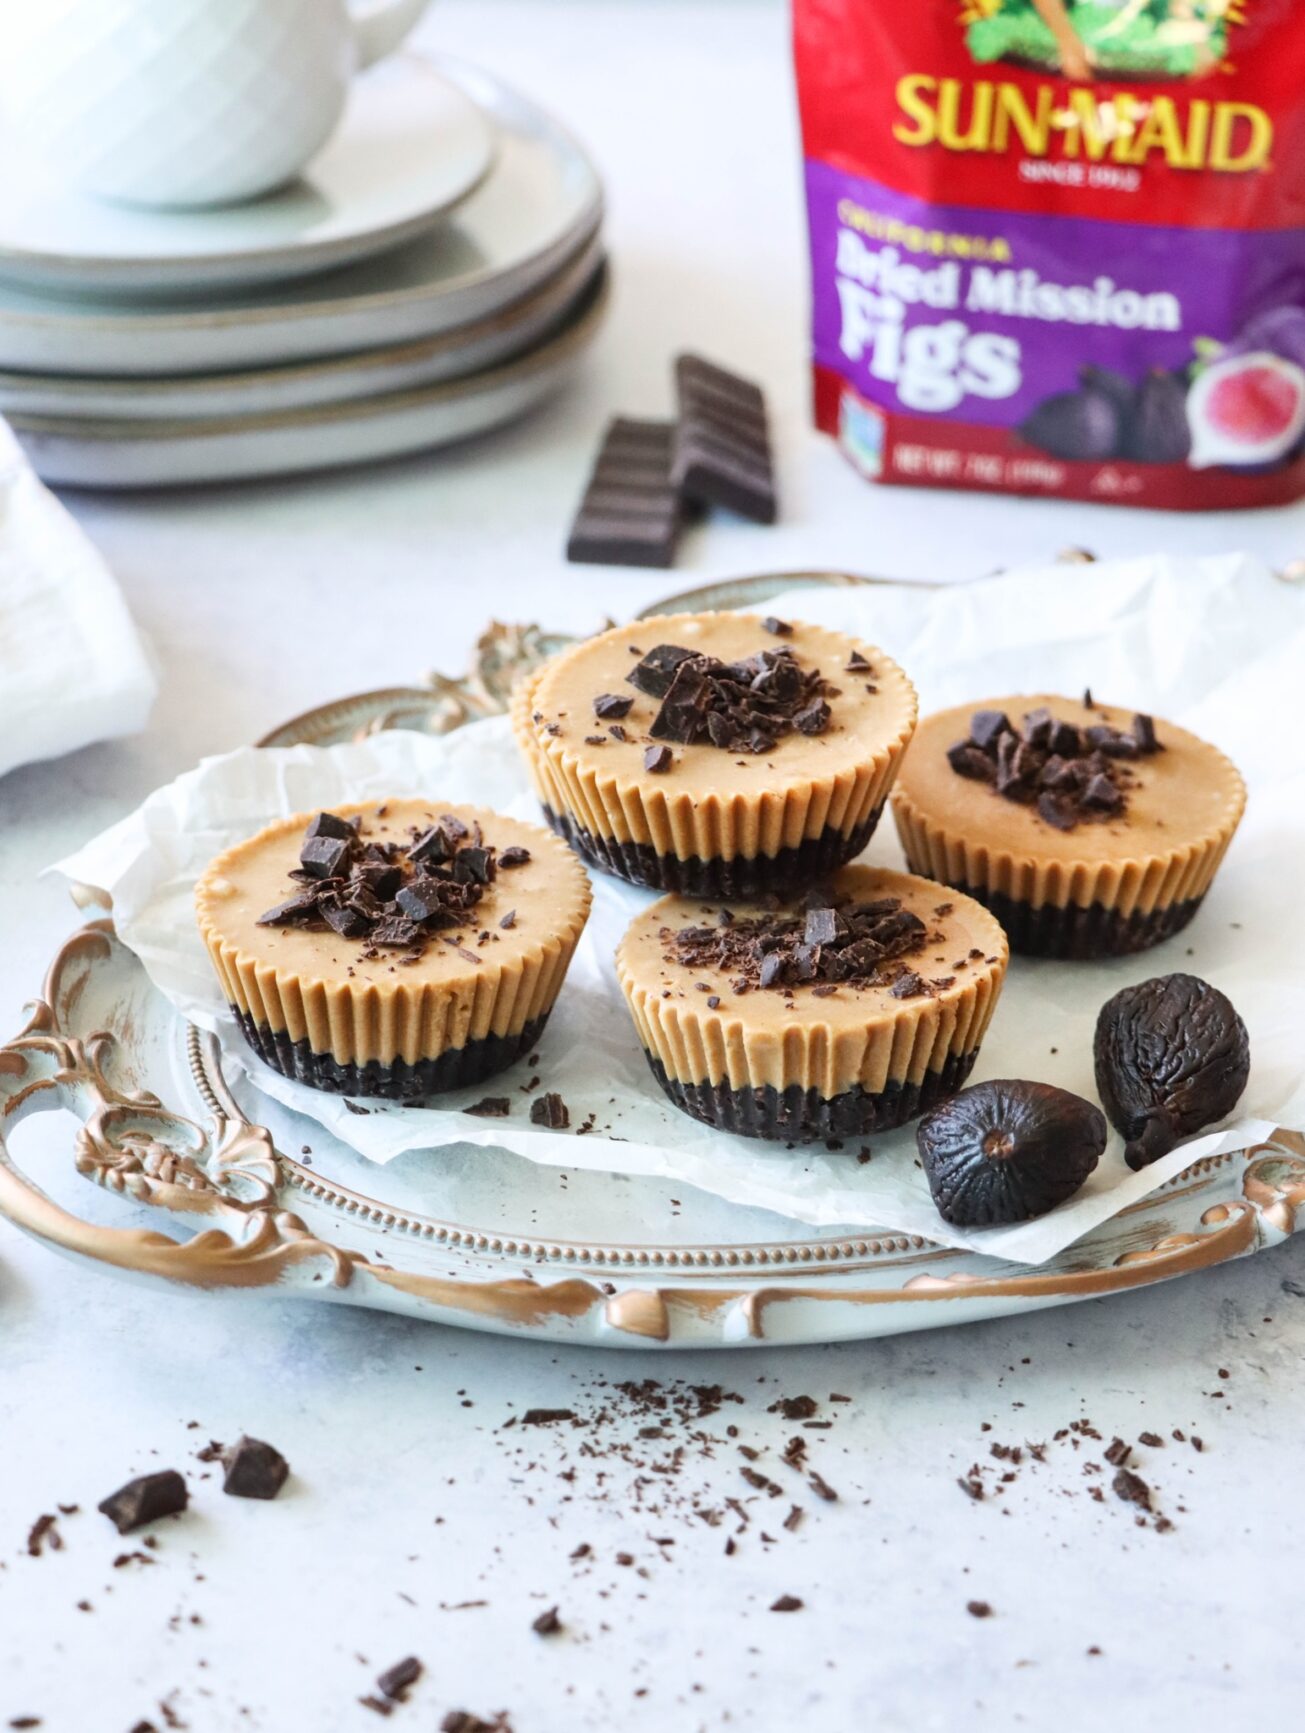 Healthy peanut butter brownie cups with dried figs satisfy a sweet tooth. The vegan peanut butter cups are so easy to make.